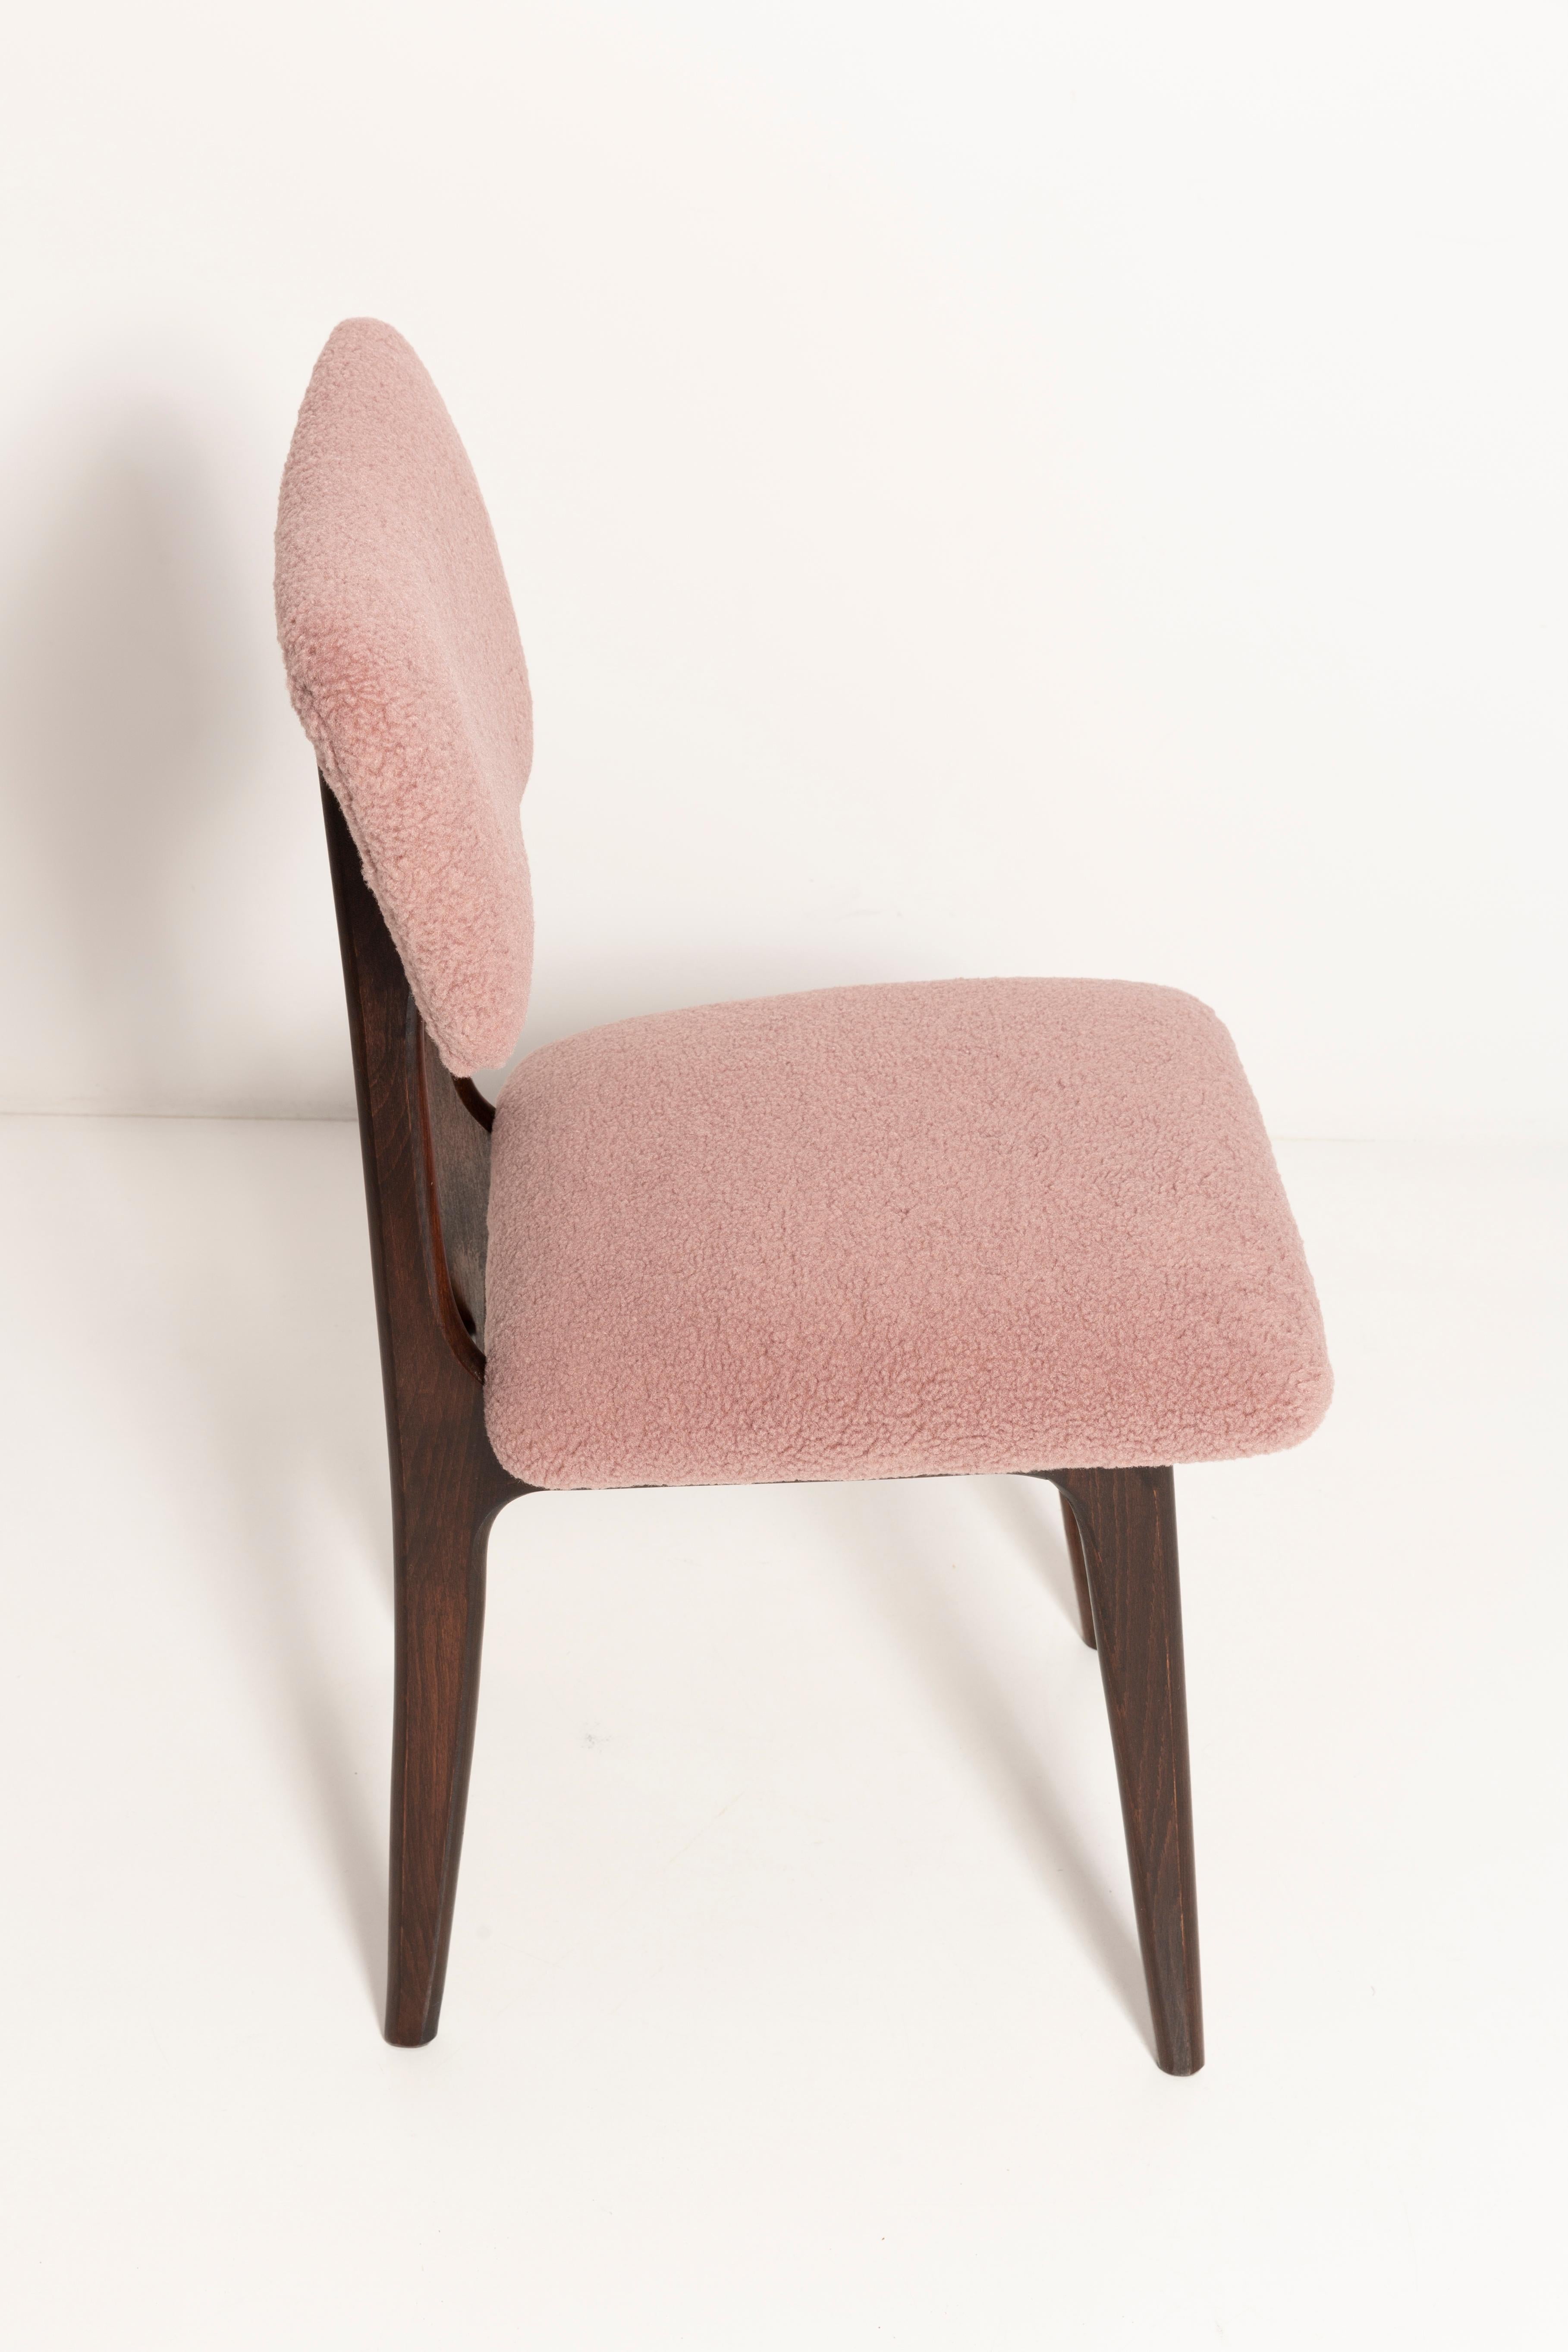 Set of Four Mid Century Butterfly Dining Chairs, Pink Boucle, Europe, 1960s For Sale 1